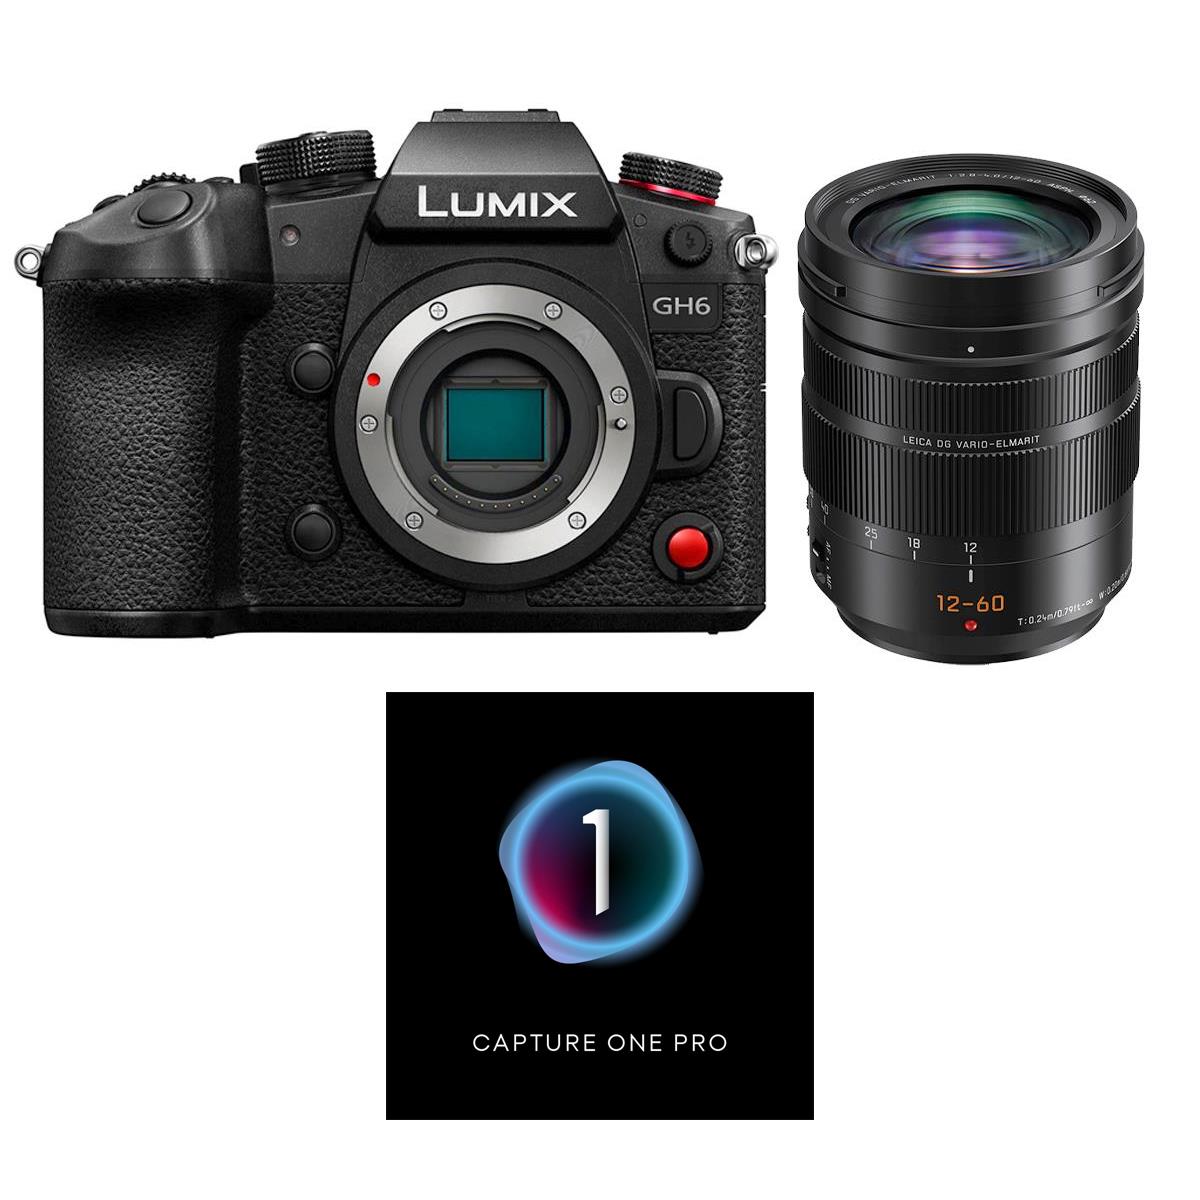 Image of Panasonic Lumix GH6 Mirrorless Camera with 12-60mm Lens with Capture One Pro